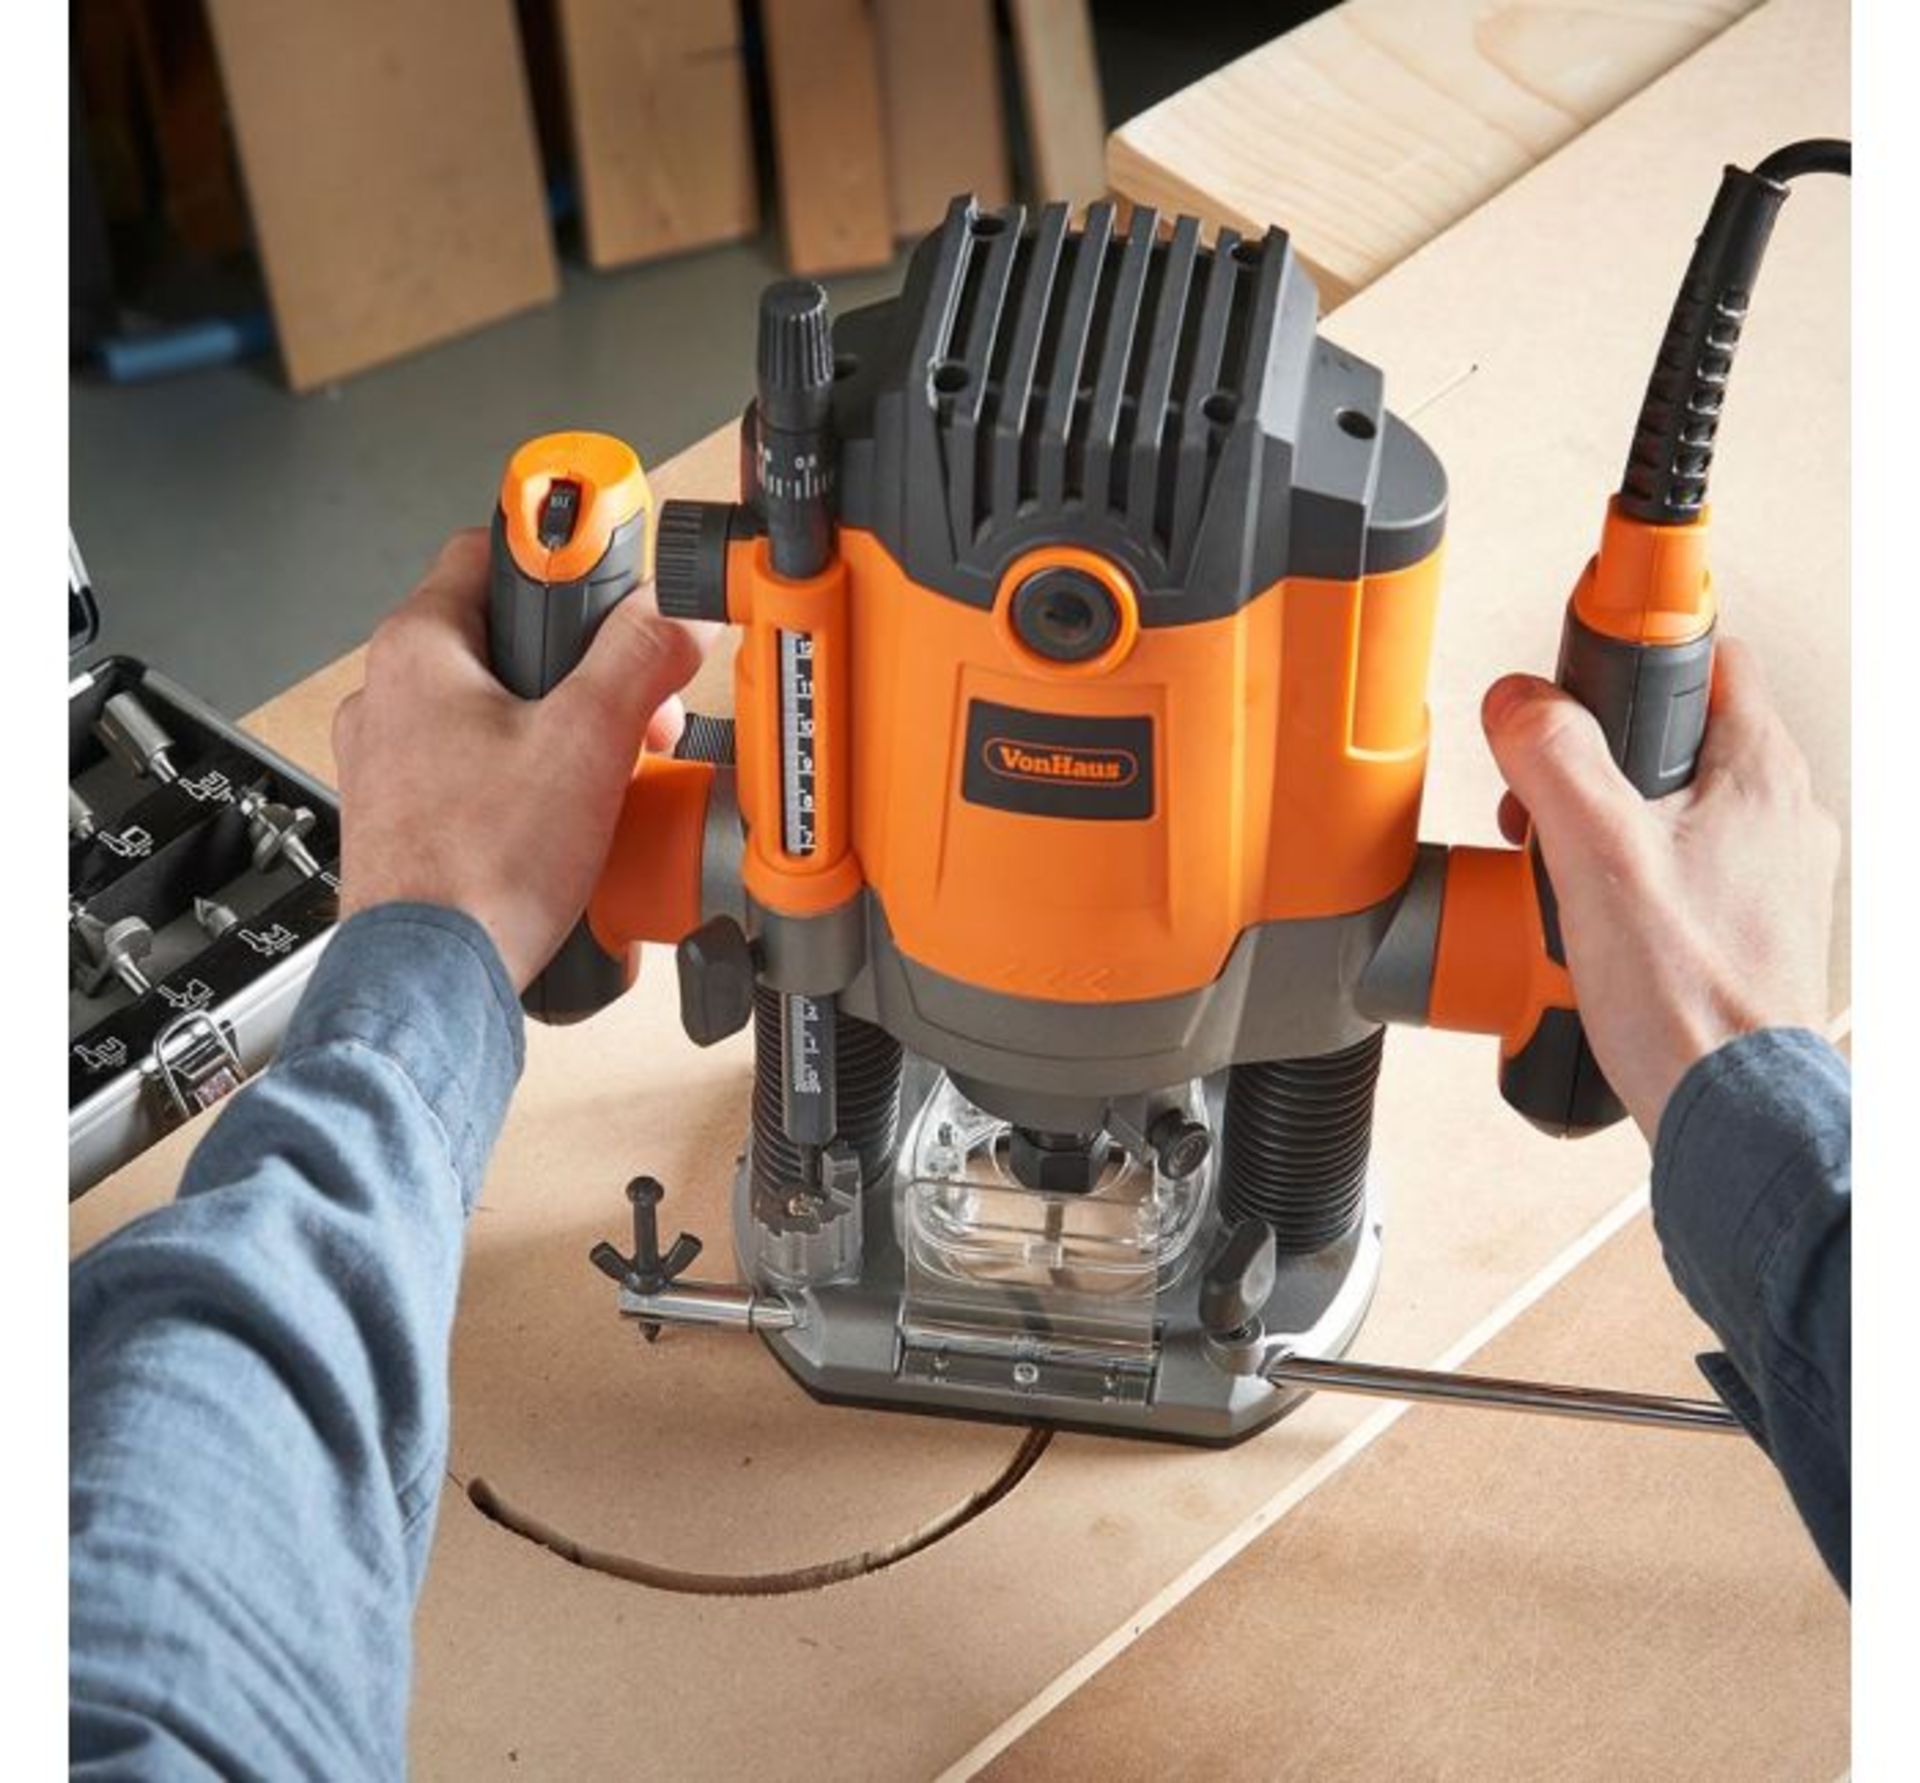 (JH26) 1600W Router Make easy work of all carving tasks, including routing, polishing, contour...